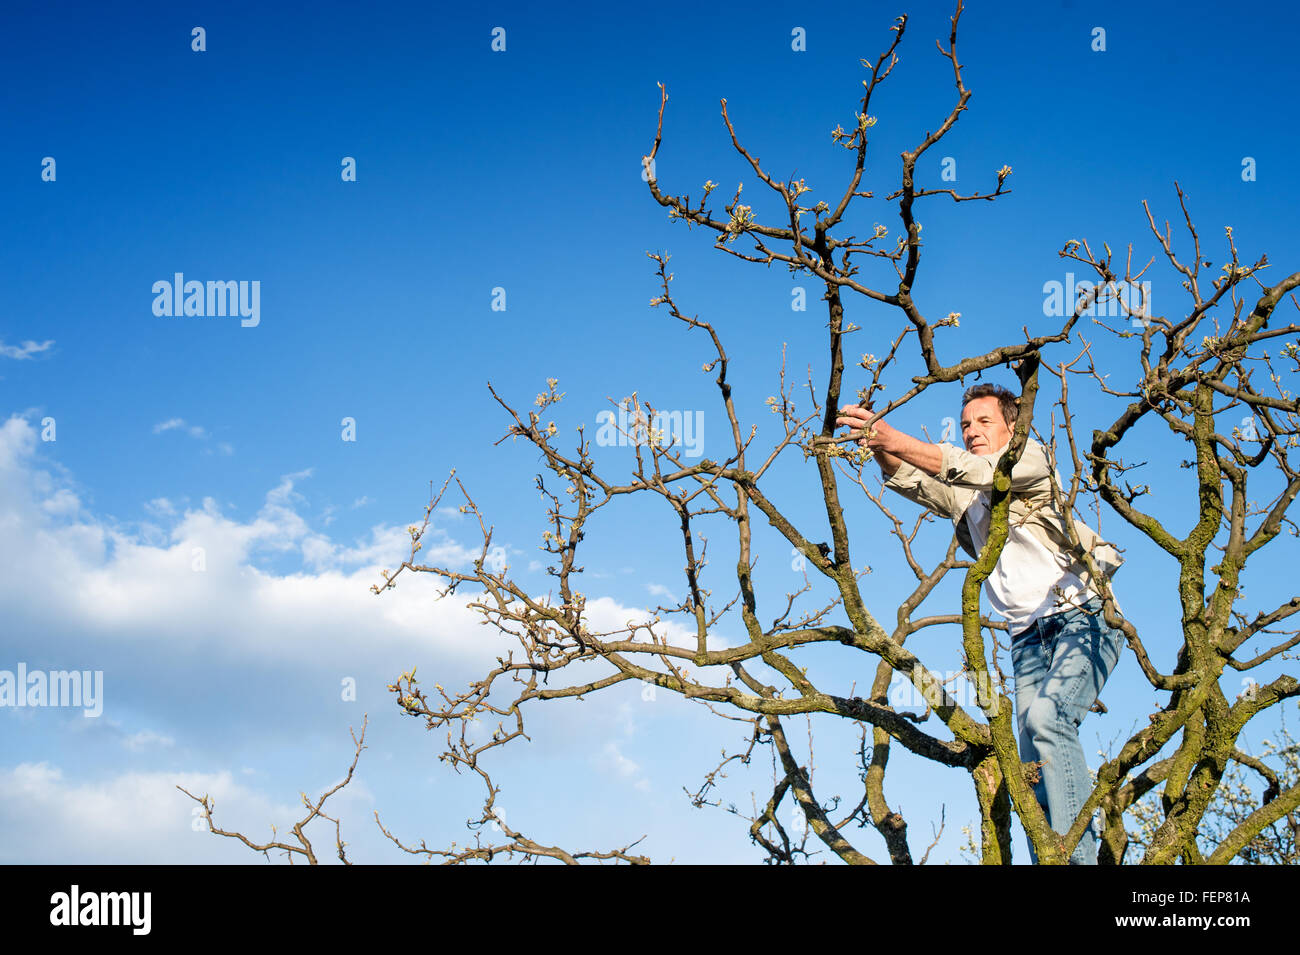 Senior man pruning tree branches against blue sky with clouds Stock Photo